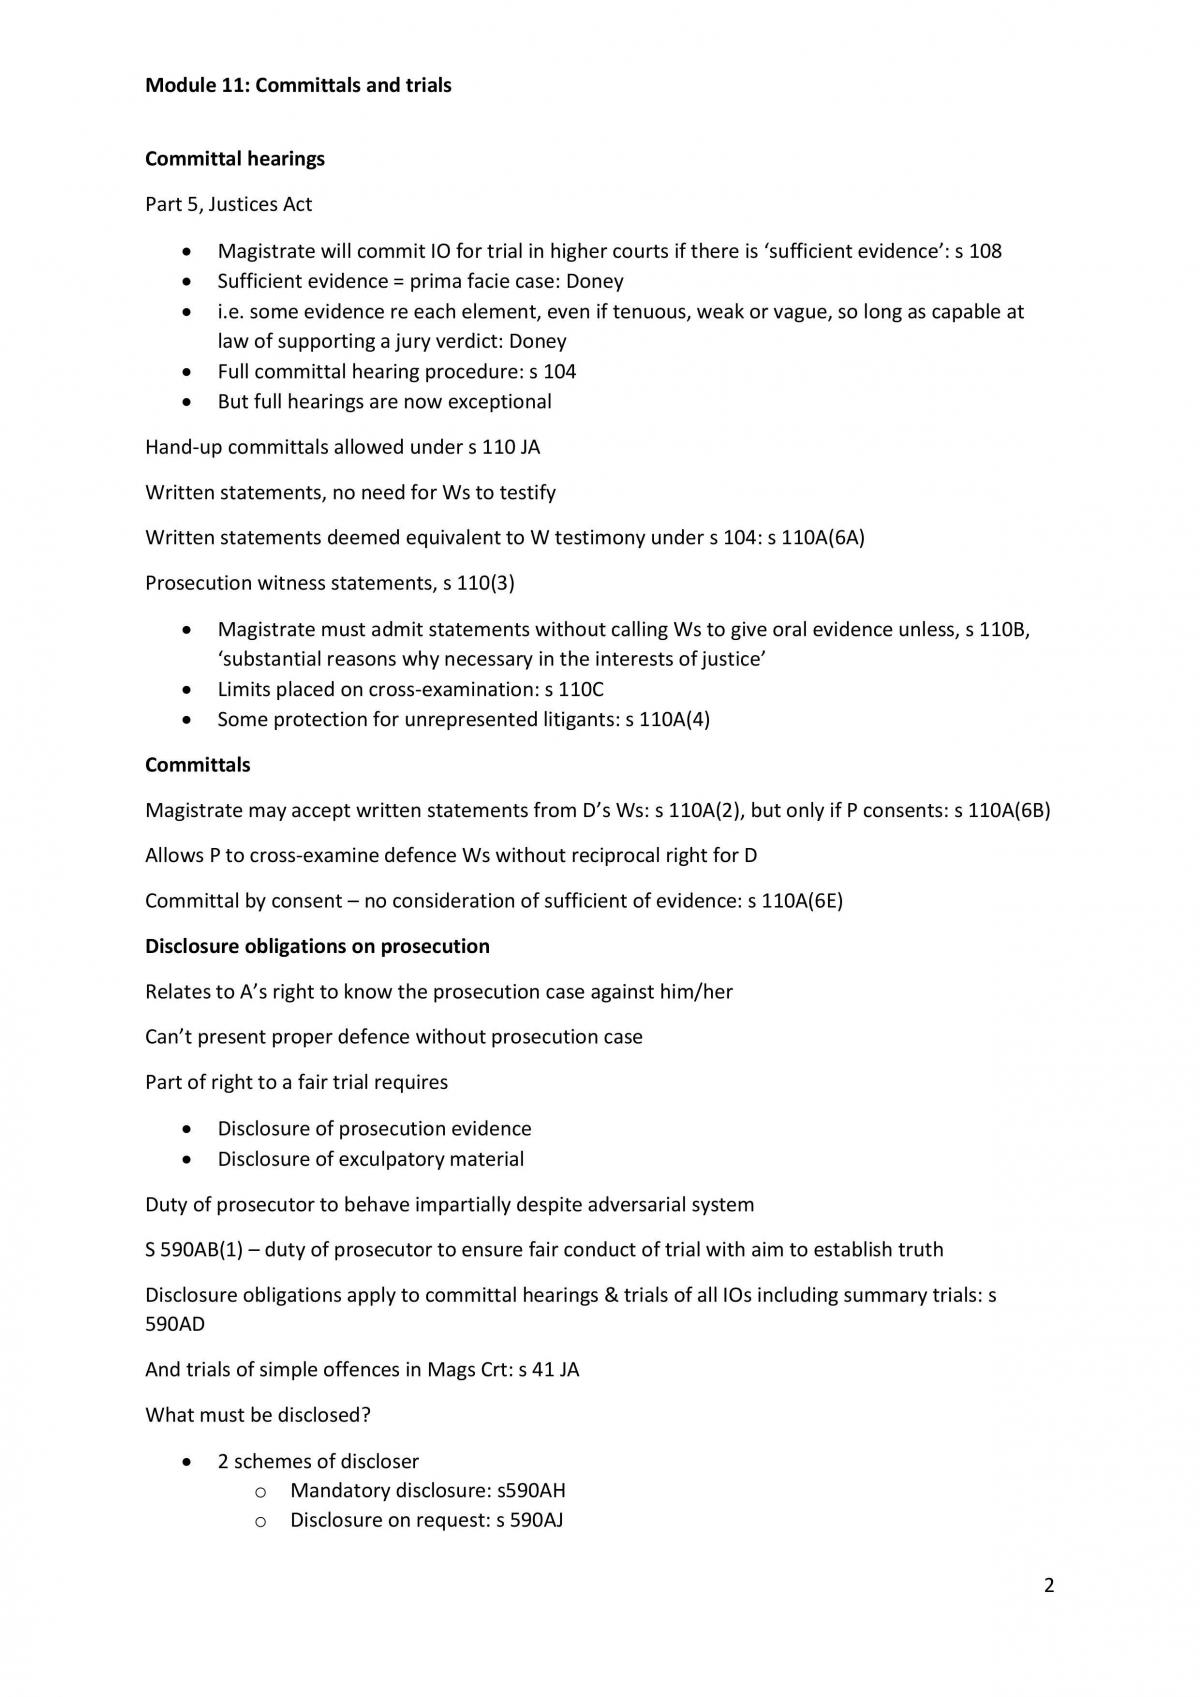 2020LAW Crime 2 Complete Study Notes - Page 64